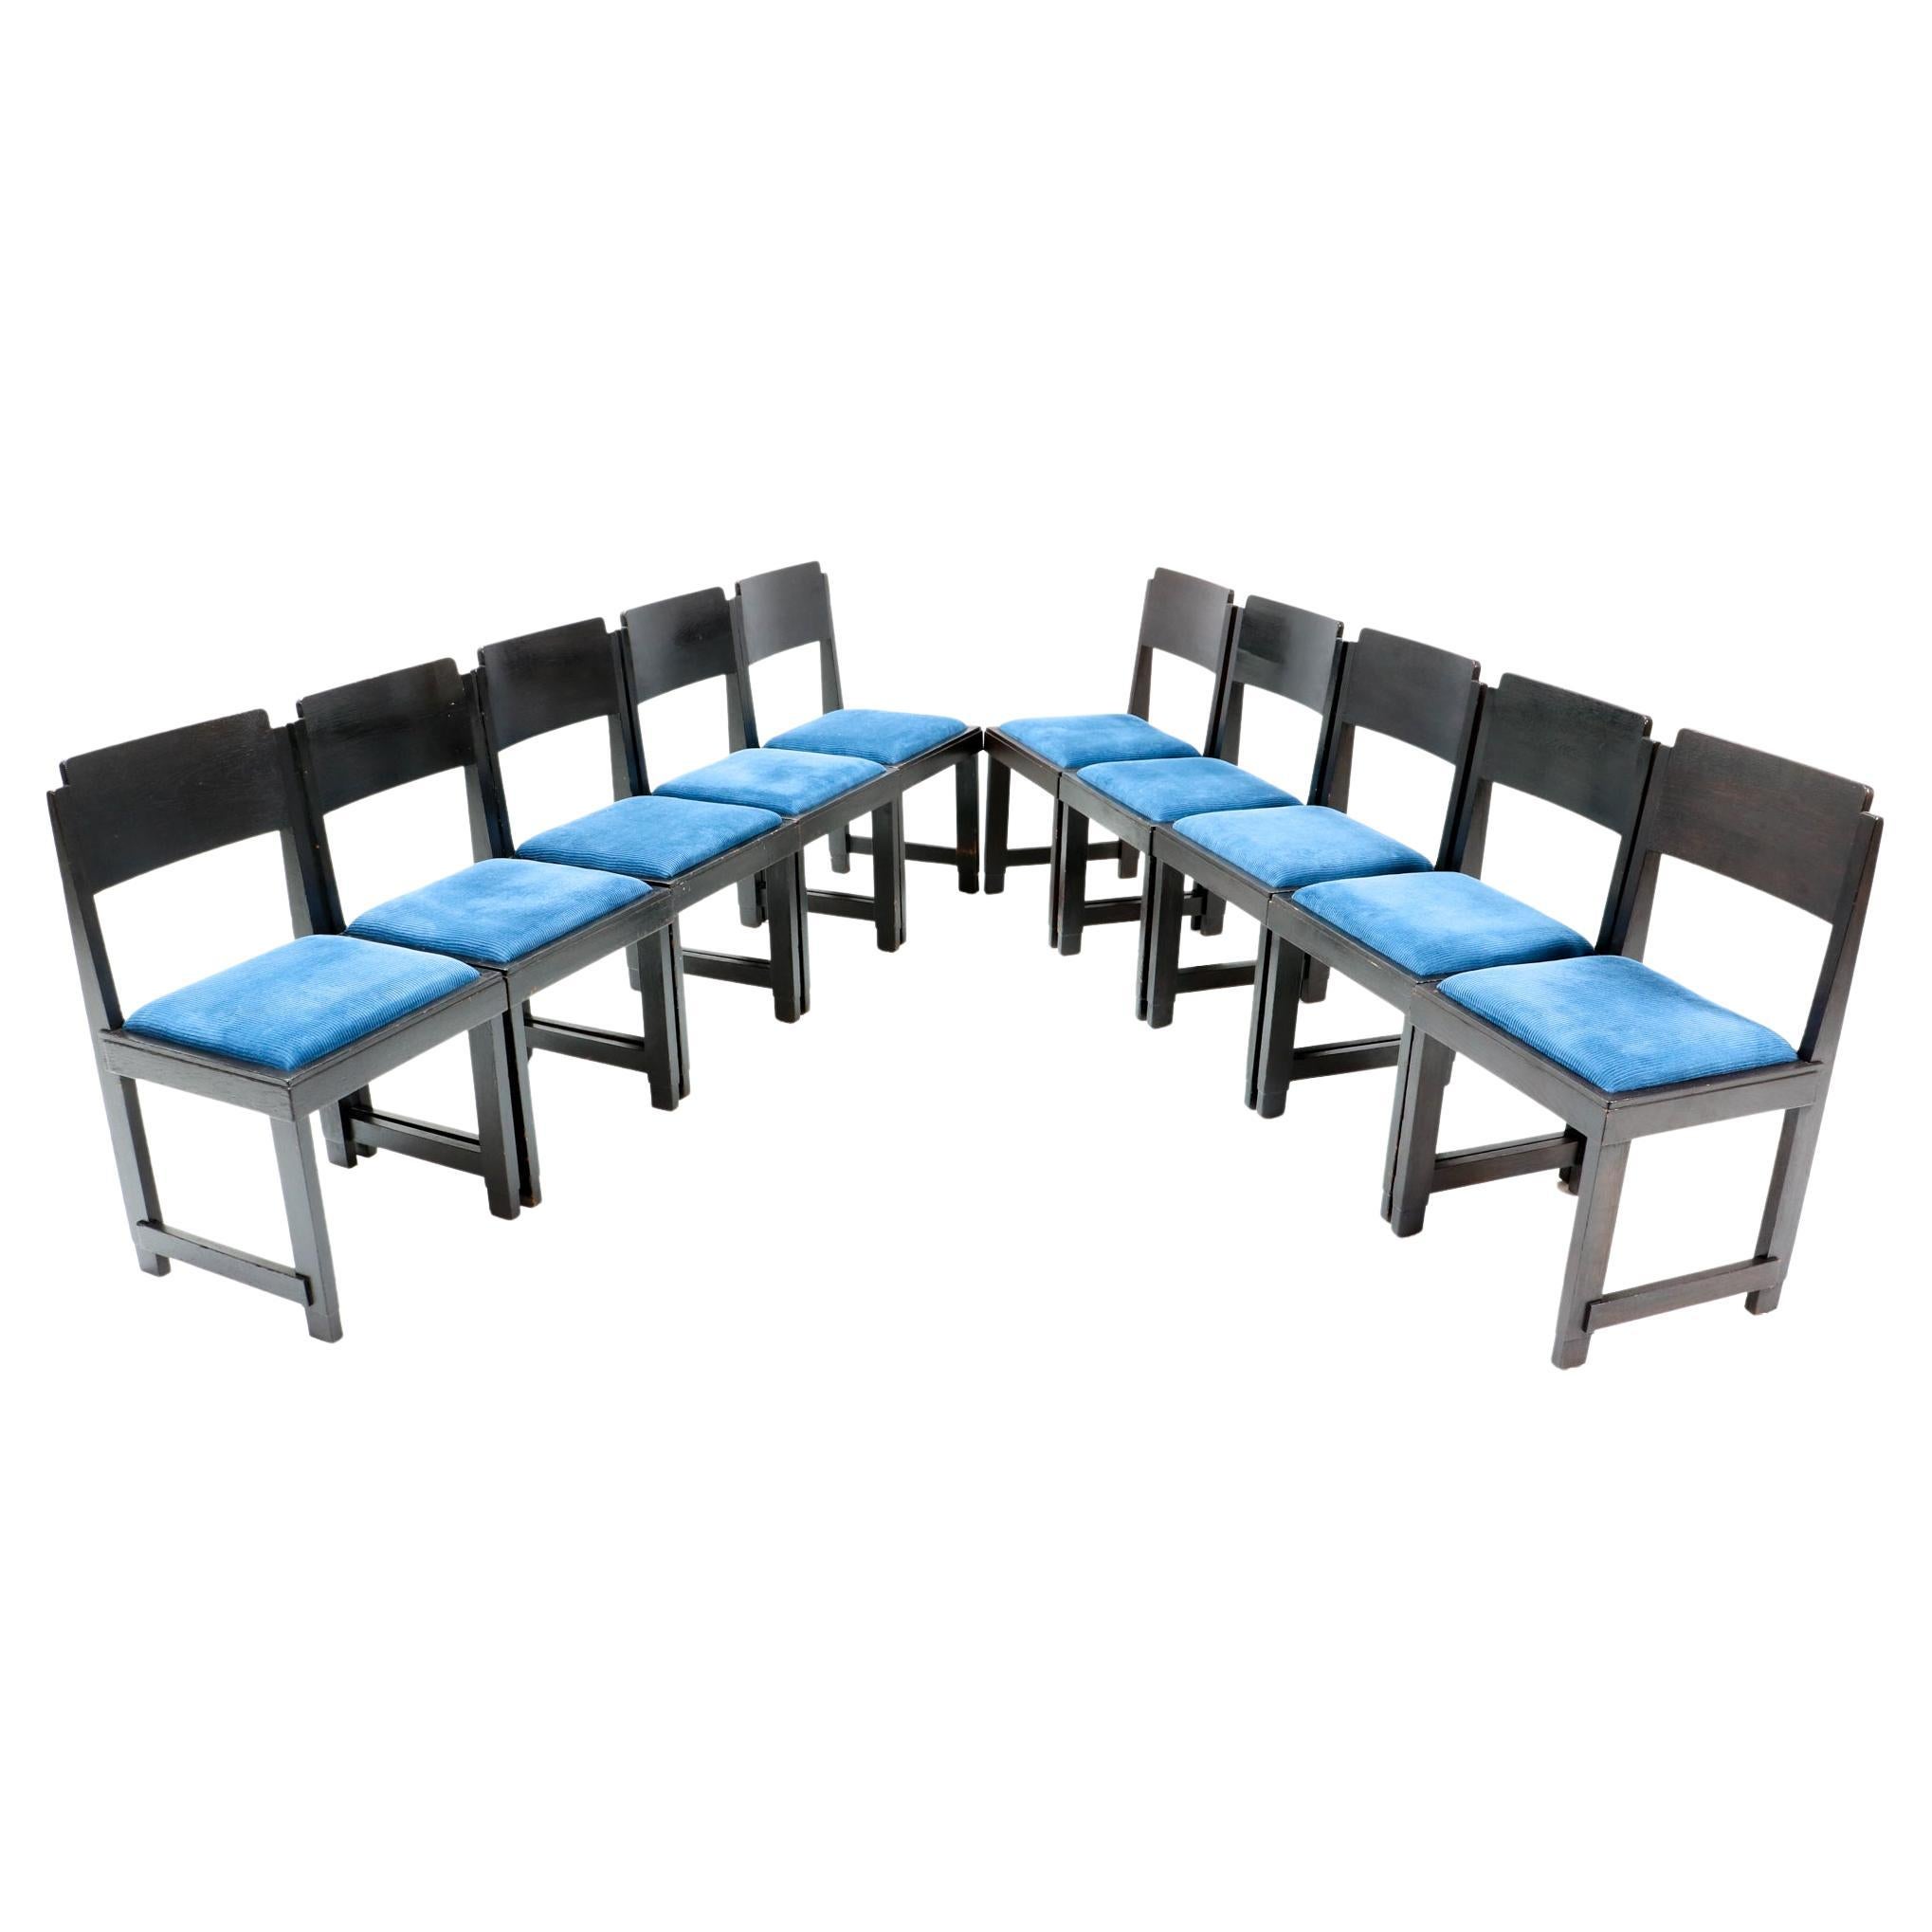 Set of Ten Art Deco Modernist Dining Room Chairs by Frits Spanjaard, 1920s For Sale